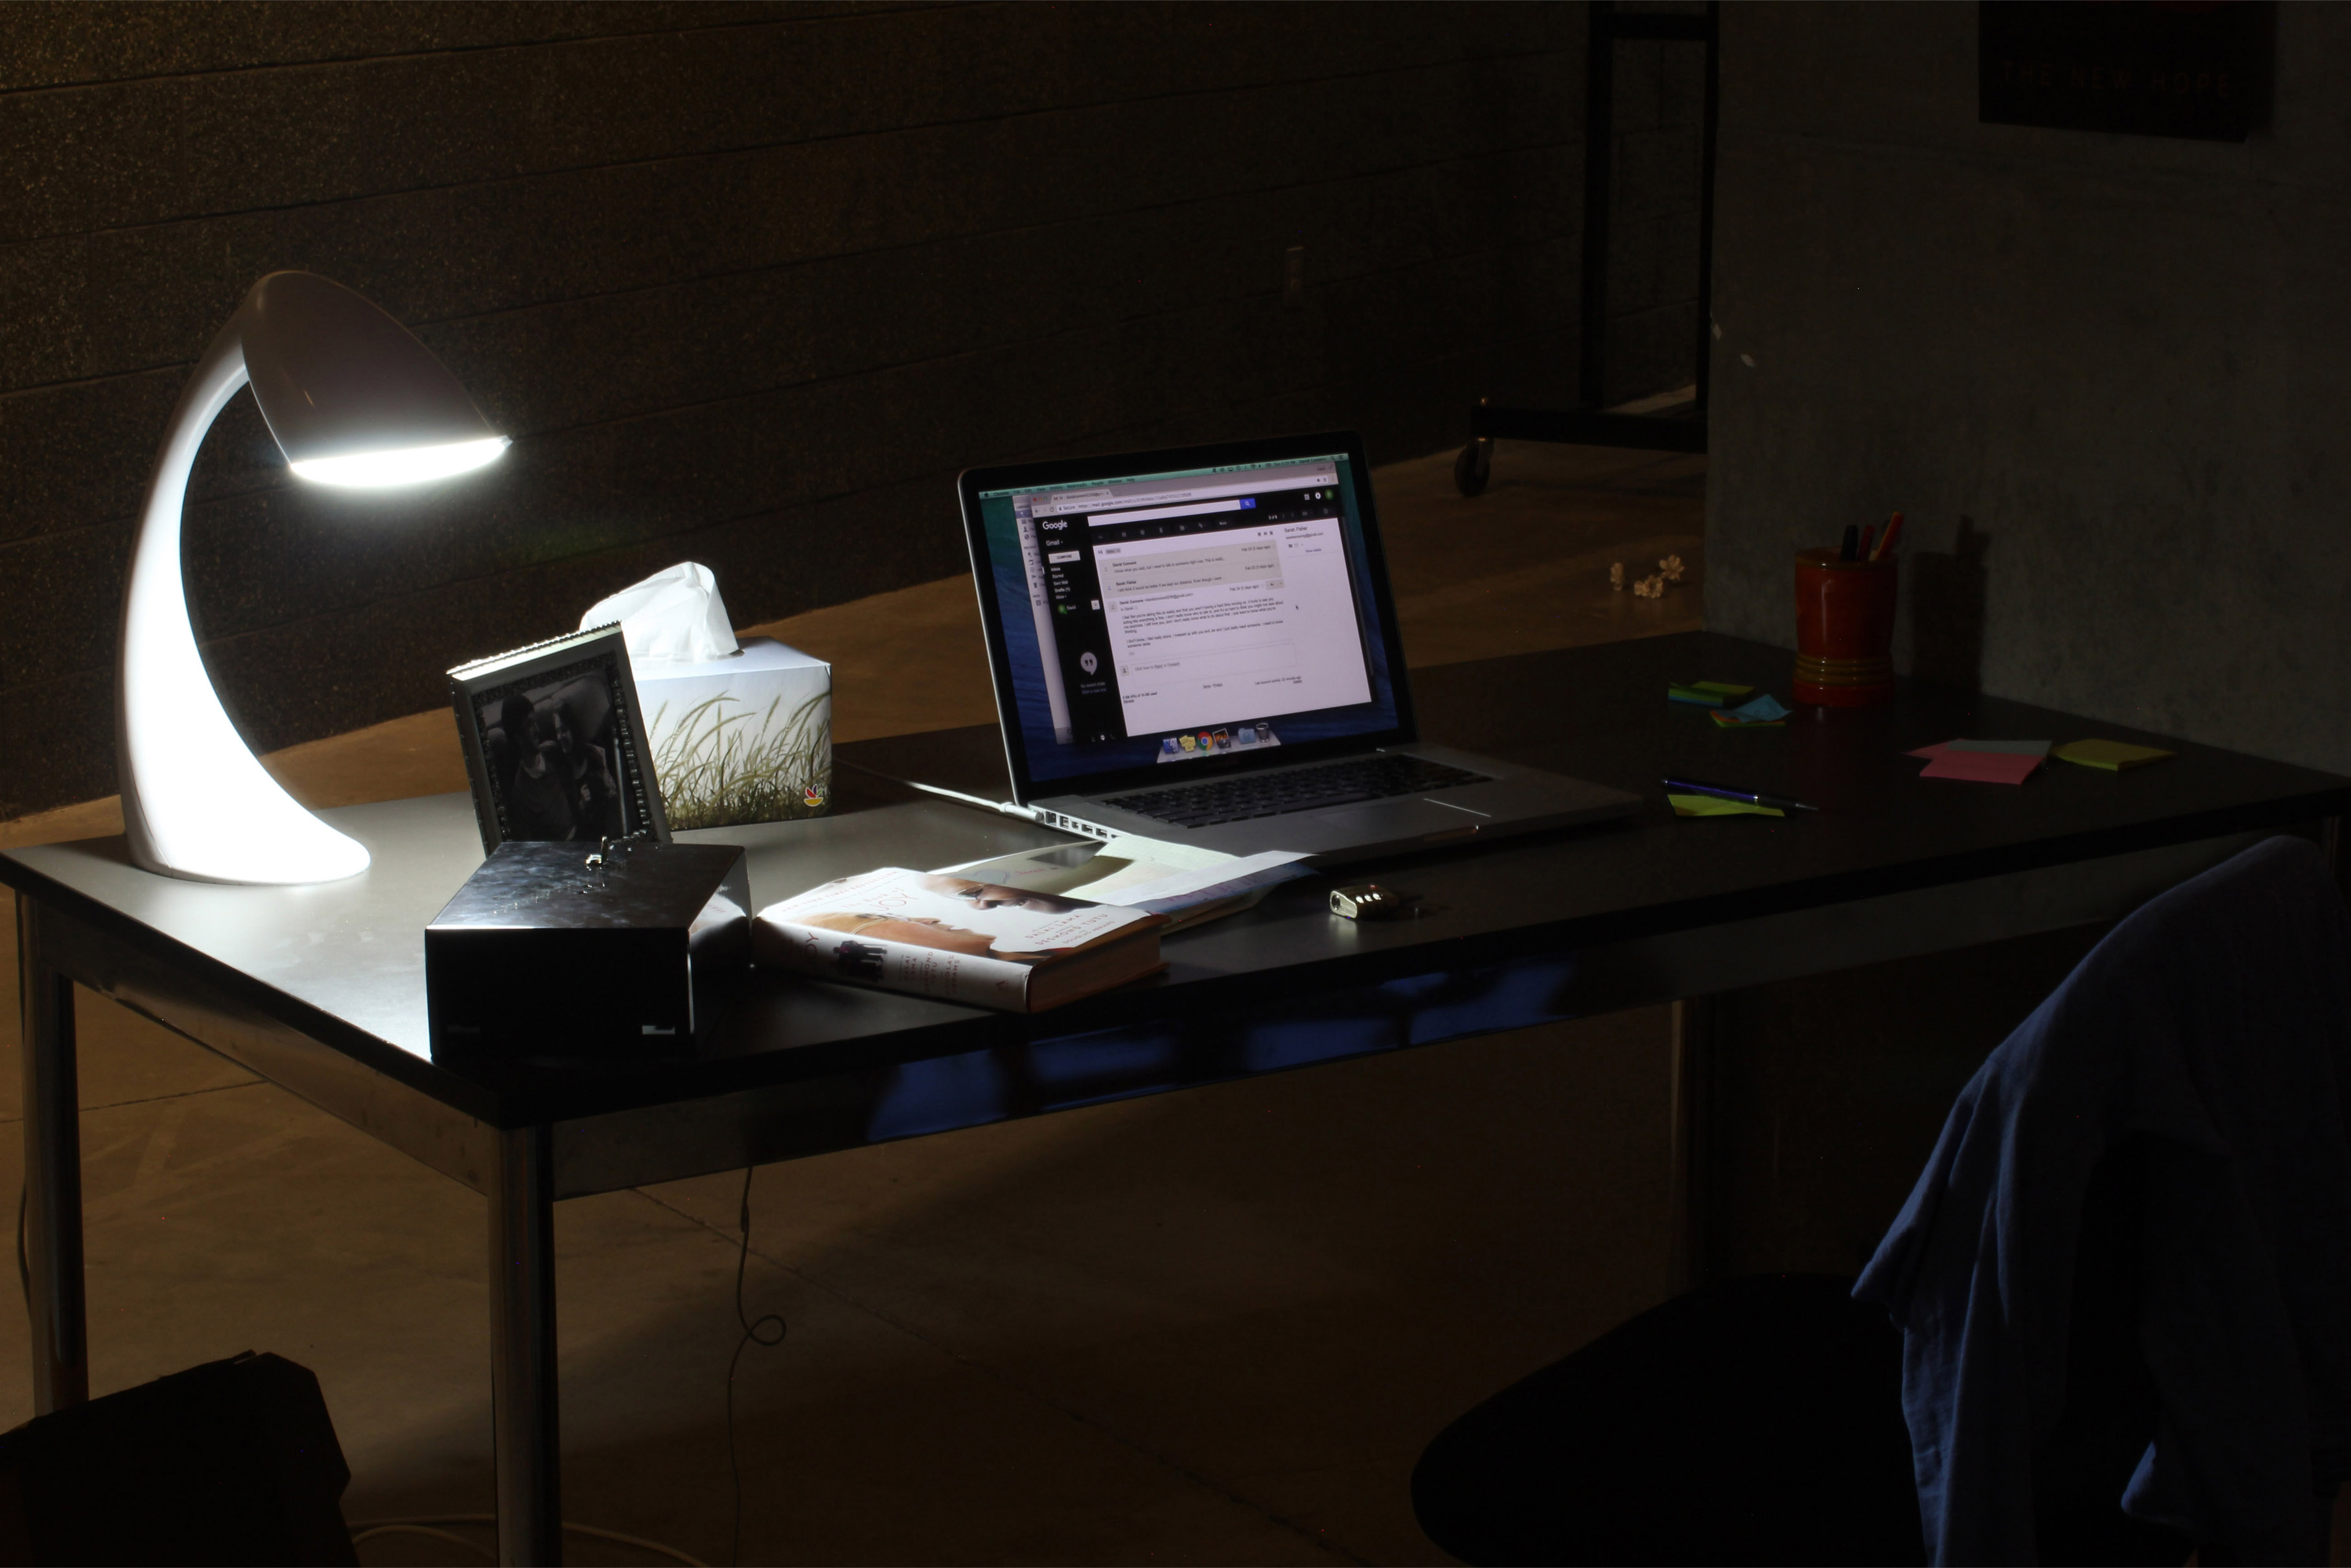 Dark desk dimly-lit by a single lamp. The desk contains a framed photo, tissues, a lockbox, sticky notes, and an open laptop.